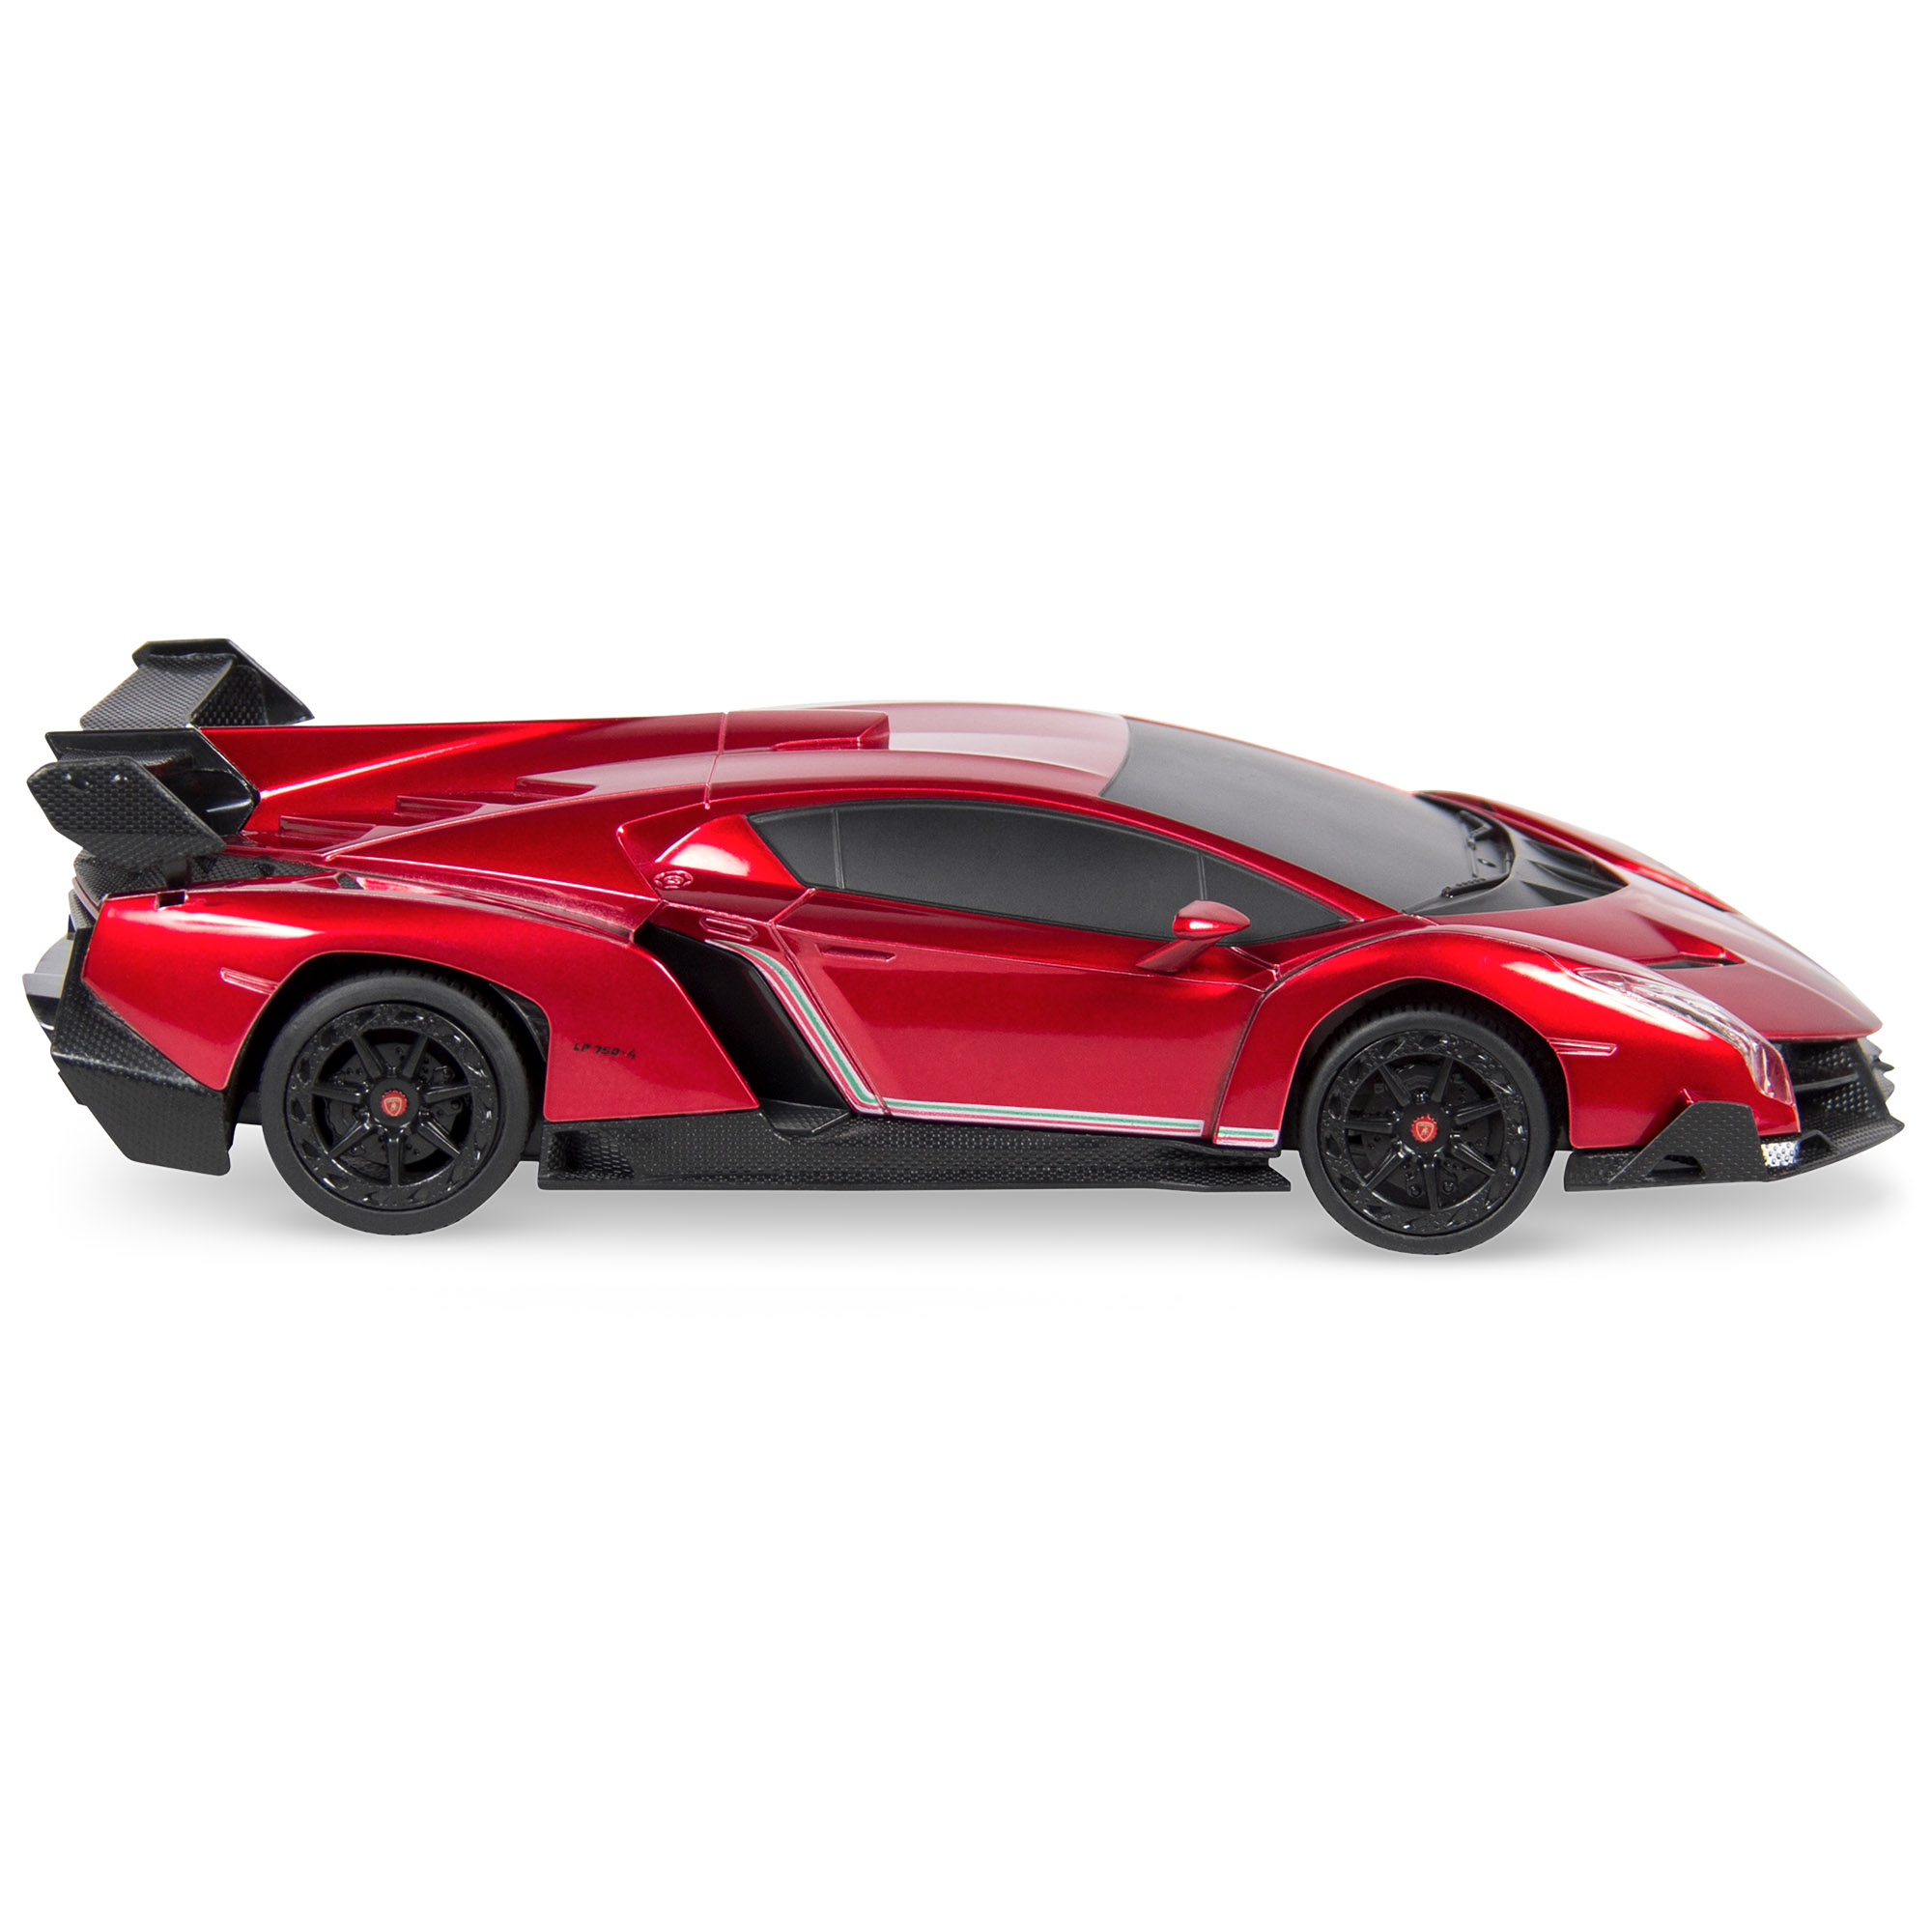 Best Choice Products 1/24 Officially Licensed RC Lamborghini Veneno Sport Racing Car w/ 2.4GHz Remote Control - Red - image 3 of 6